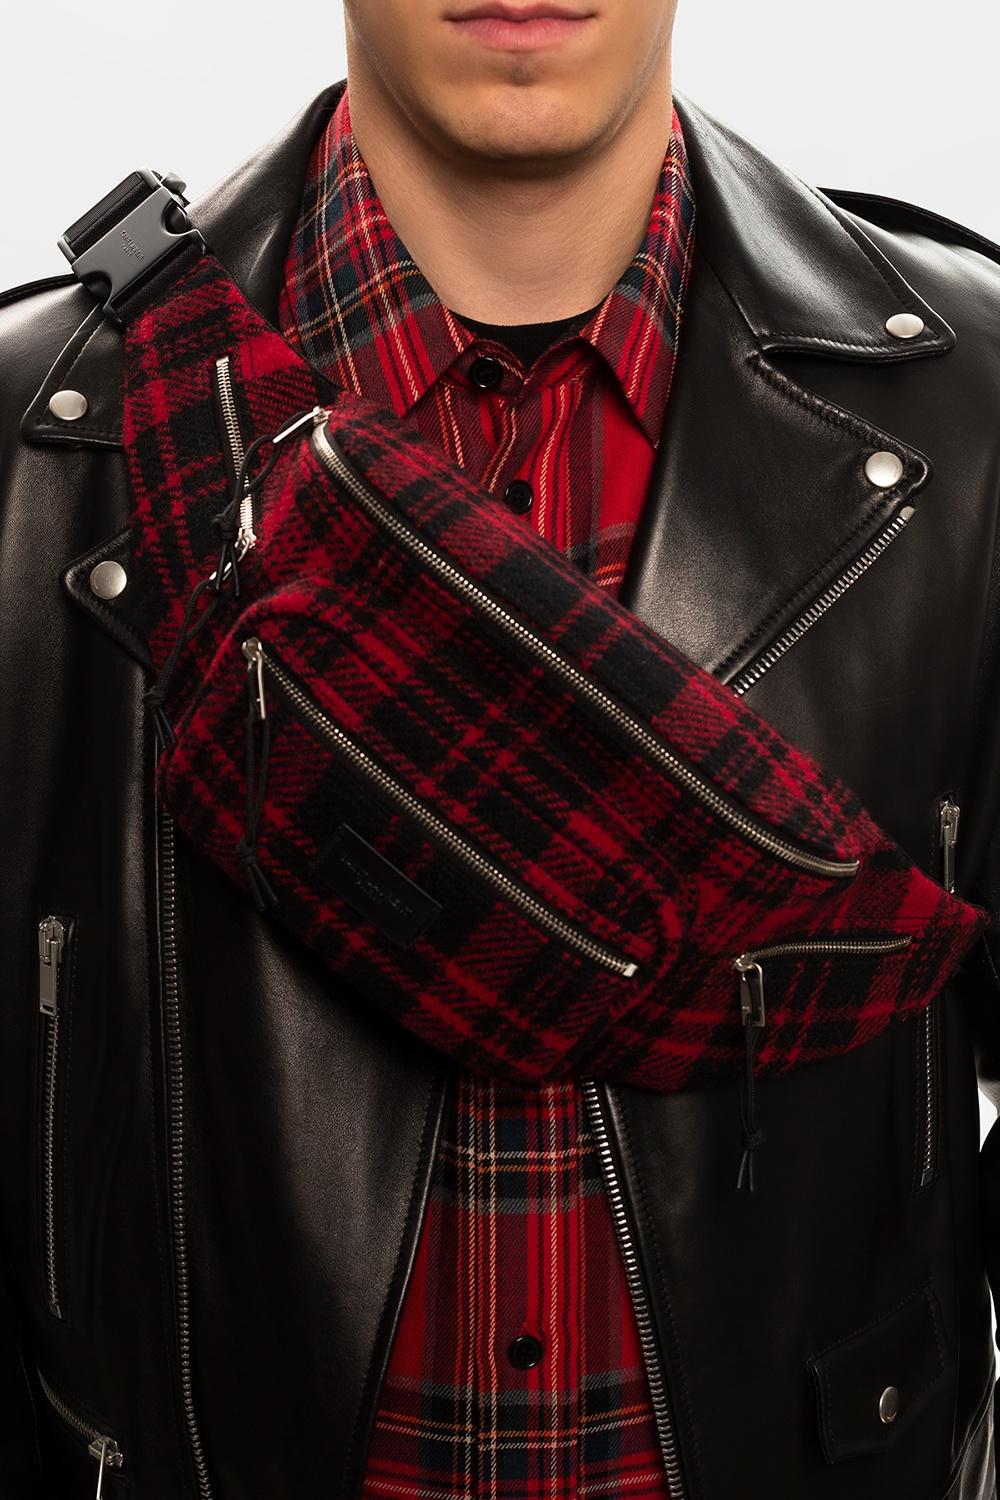 Color: Black and red tartan pattern
Material: Wool with leather finishes
Style No: 581375
Measures: H 5.5” x L 9.5” x D 3”
Comes With: Dust bag and card
Condition: New